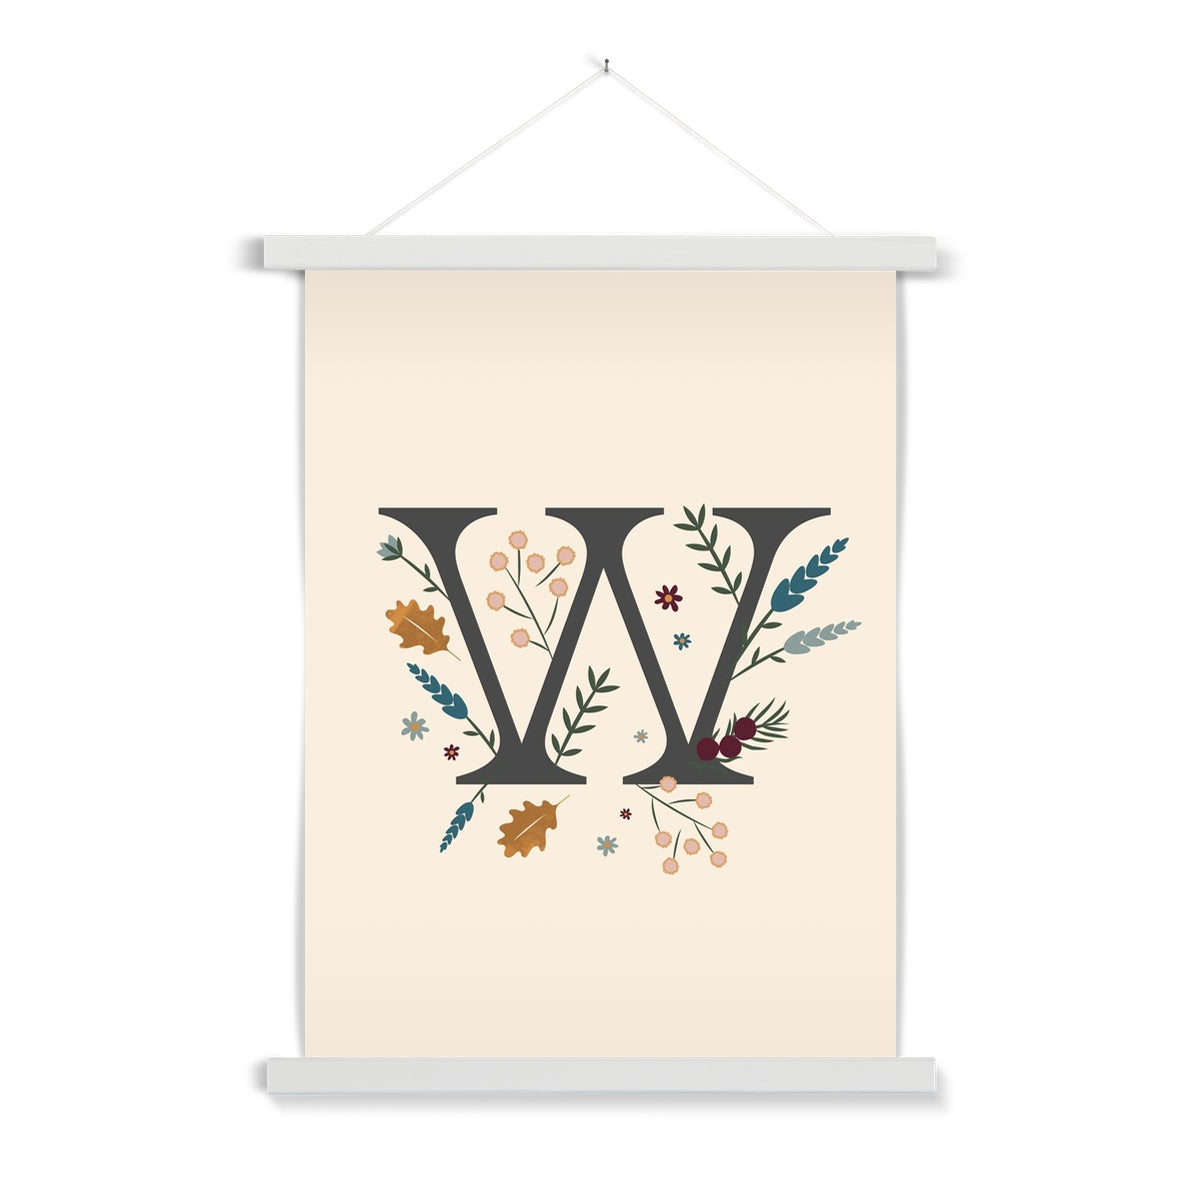 Initial Letter 'W' Woodlands Fine Art Print with Hanger